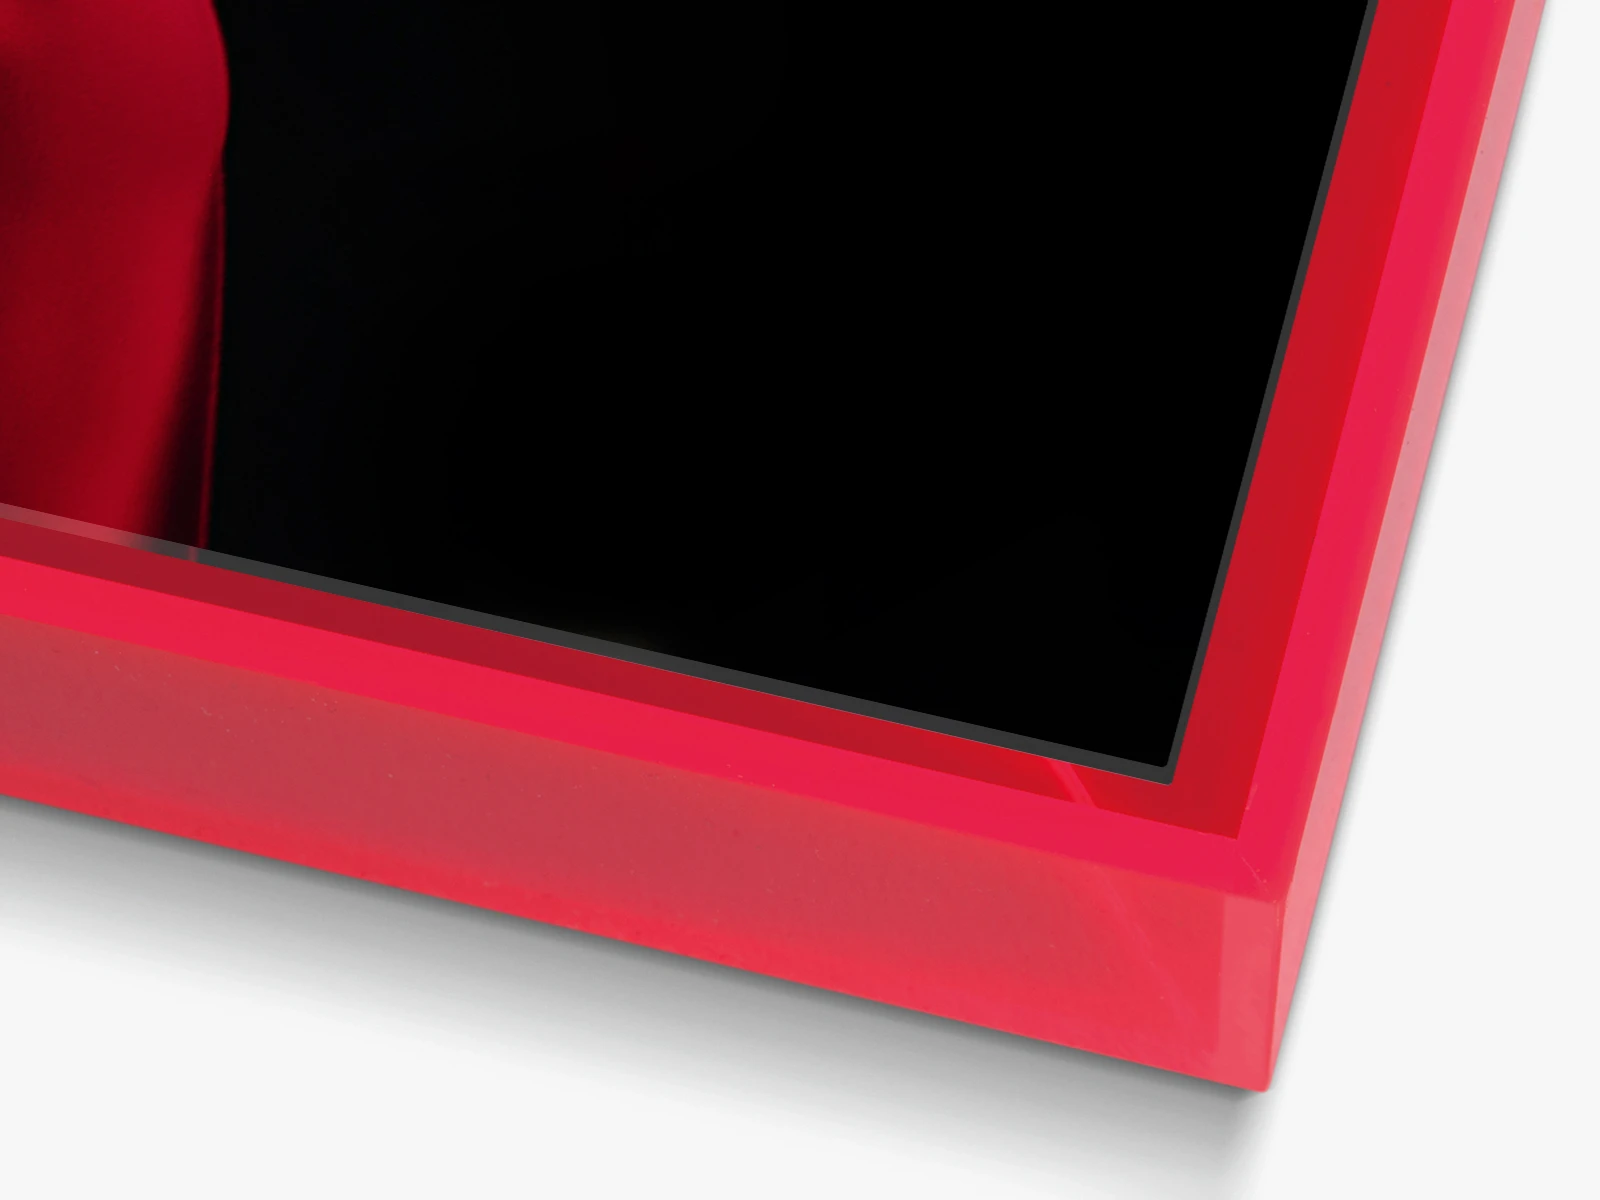 Close up of a corner of the red Pop Art Frame.